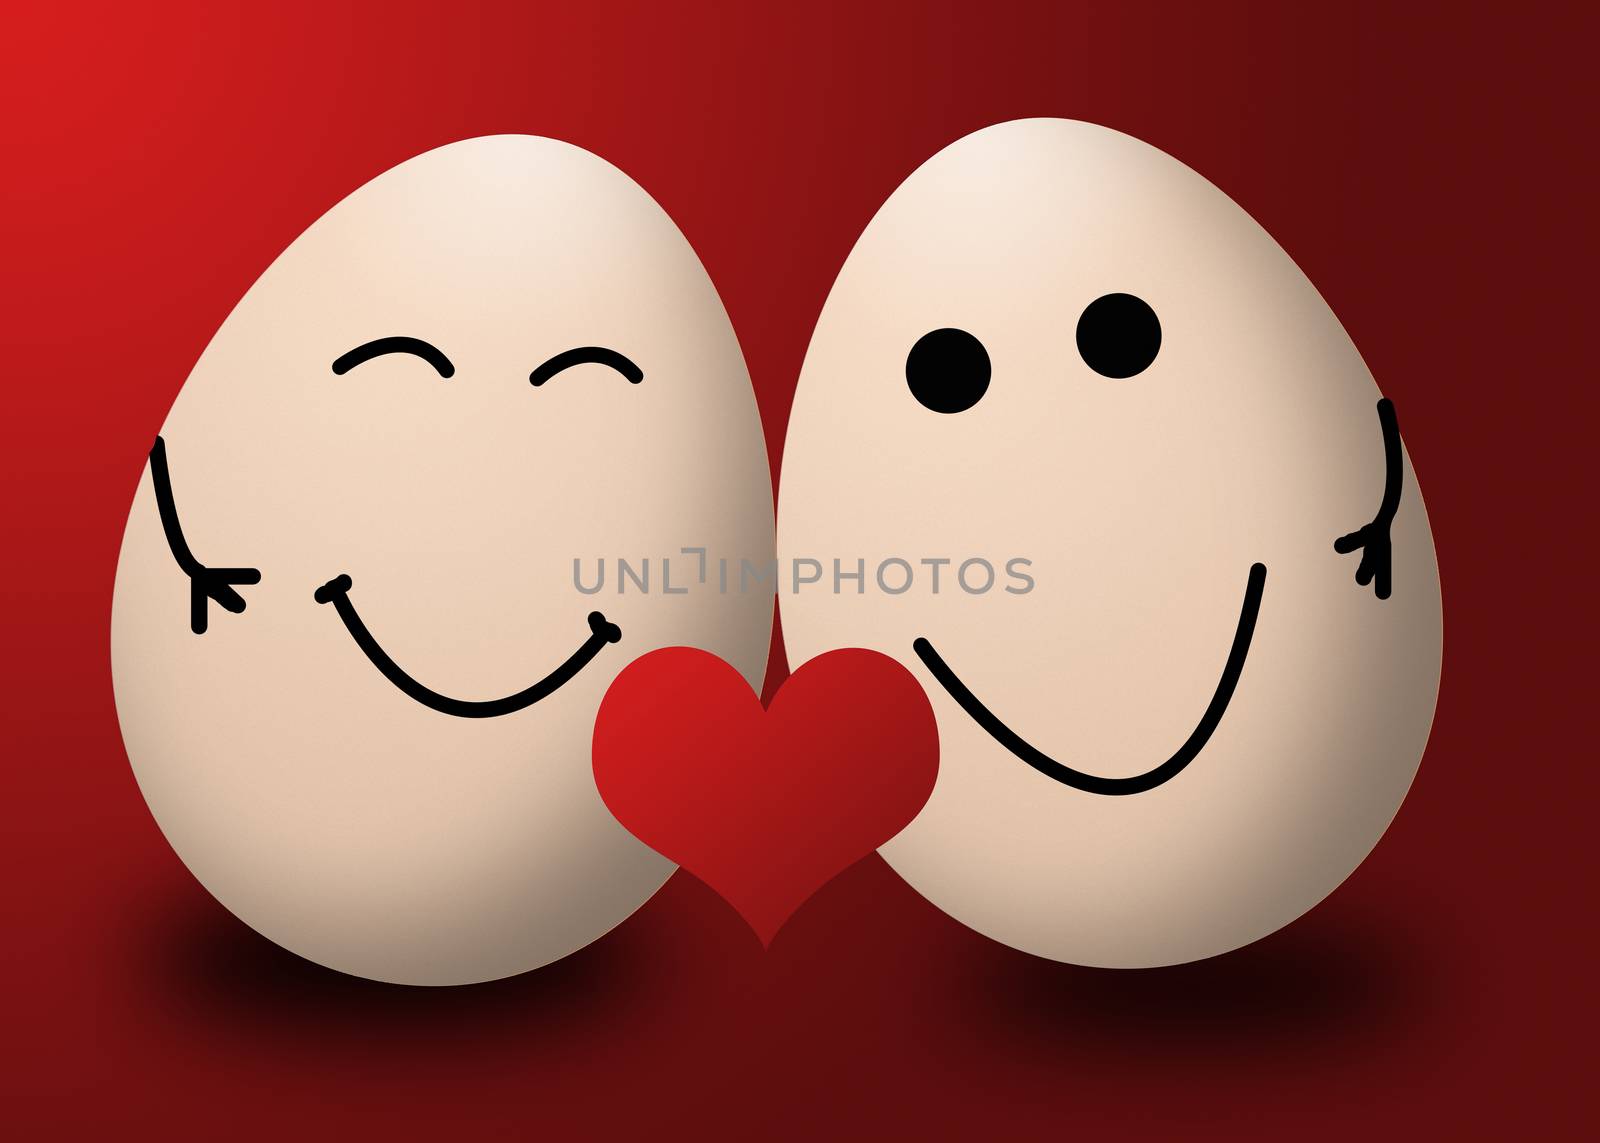 happy valentines day my egg love red heart by Havana